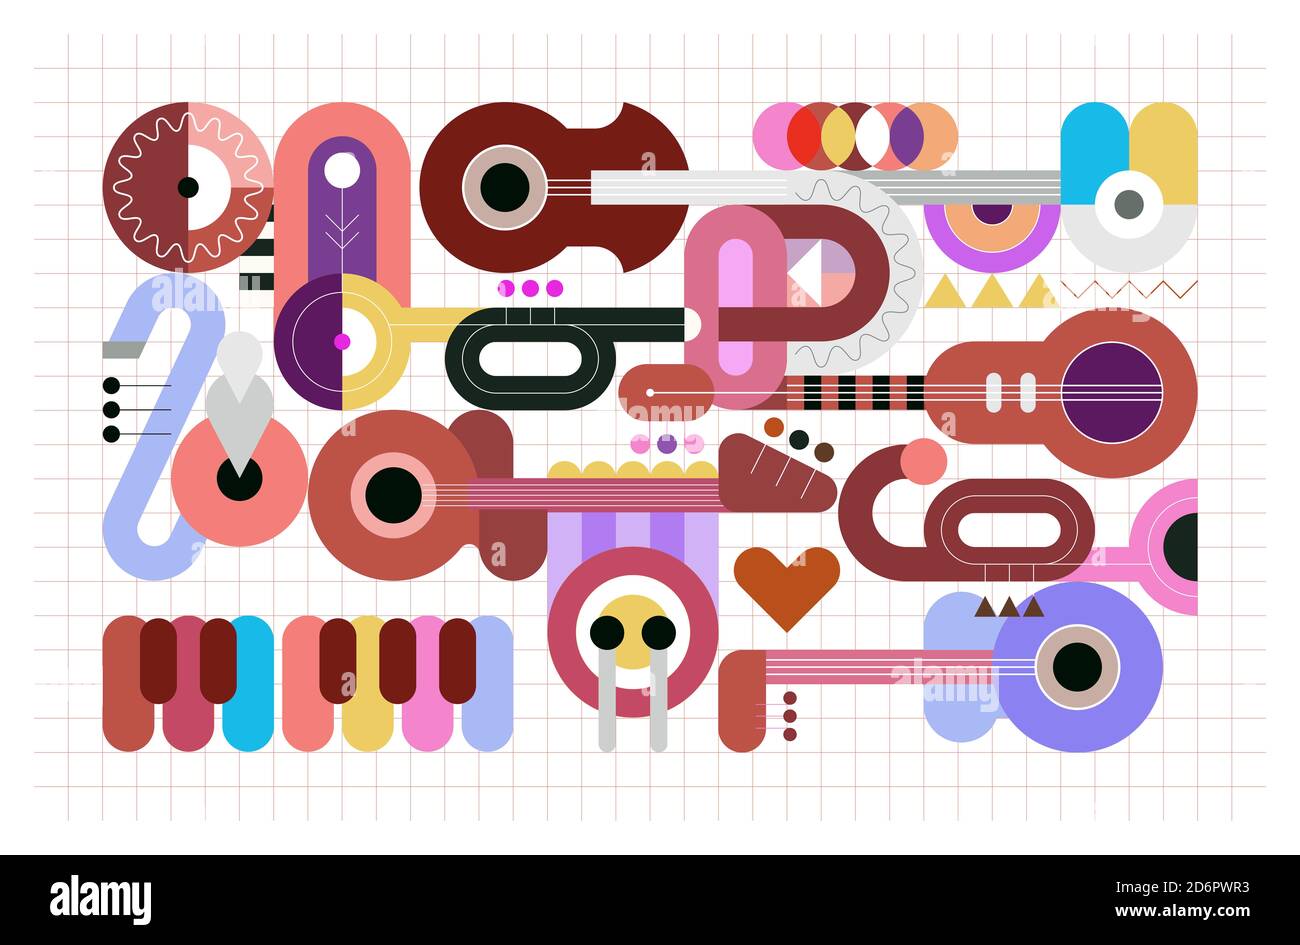 Geometric style graphic illustration of different musical instruments on a grid. Colored design with guitars, trumpets, sax, piano and drum. Abstract Stock Photo